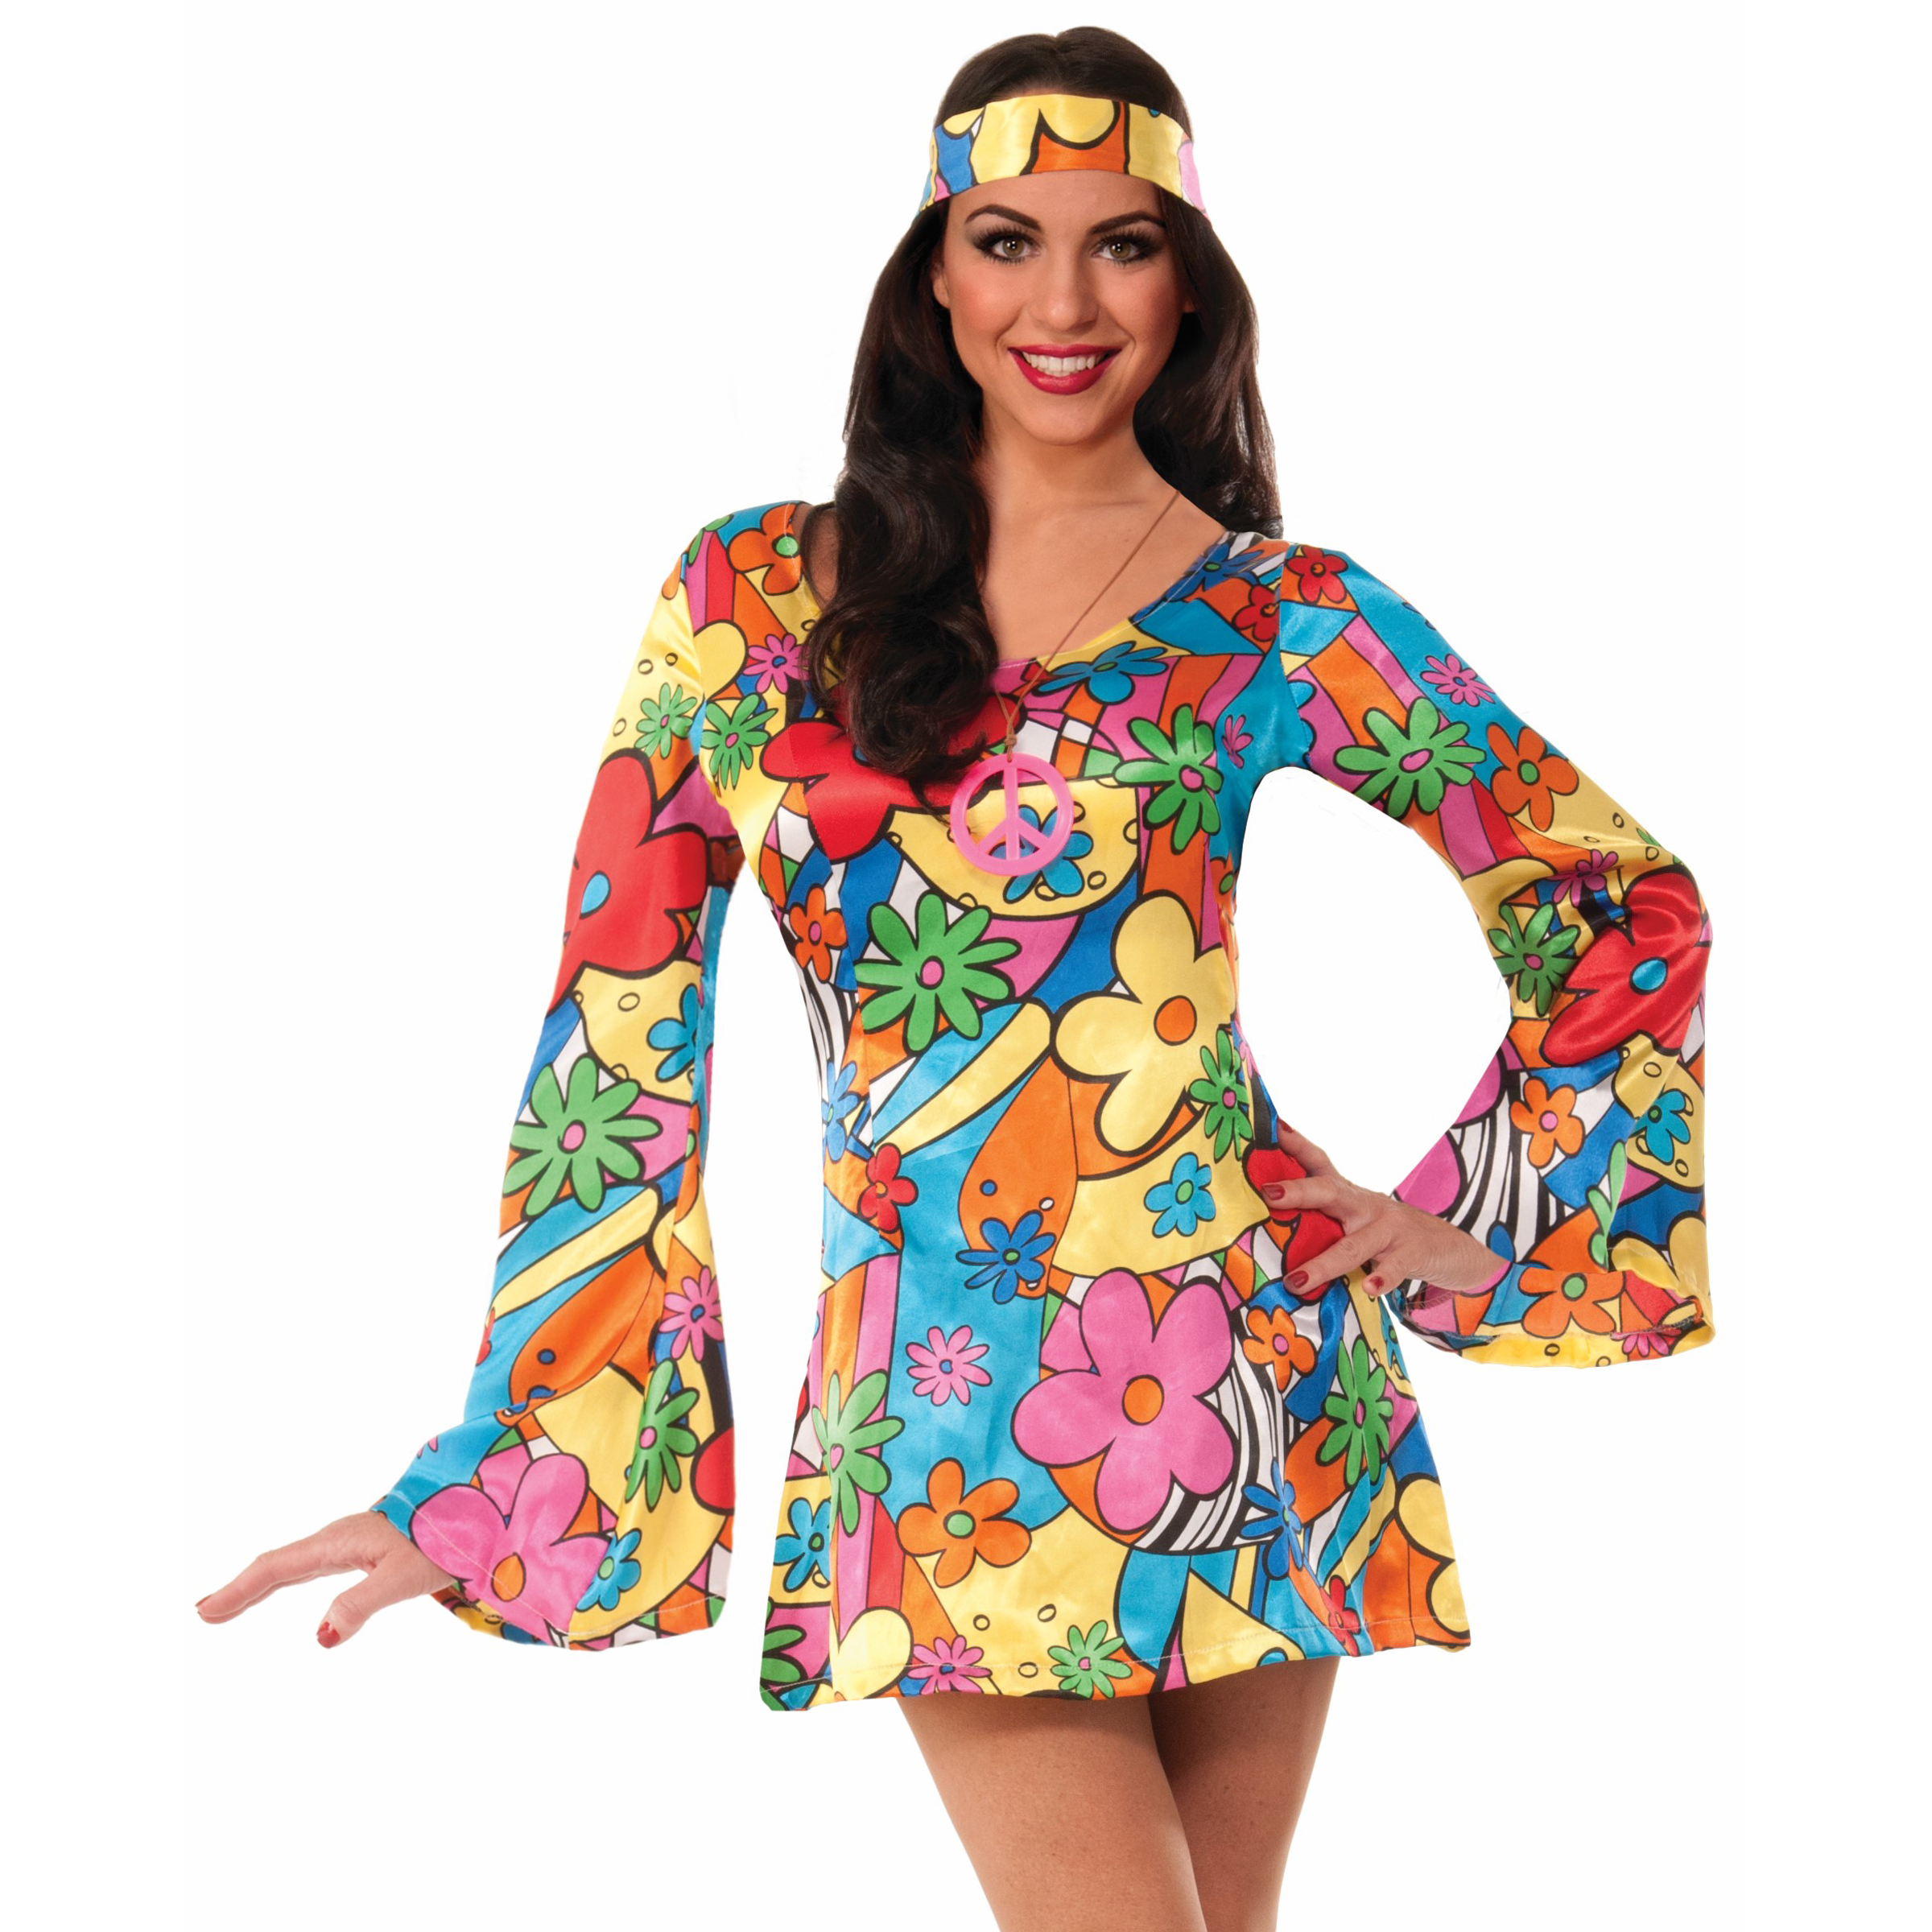 Groovy GoGo Dress – Beauty and the Beast Costumes, Chattanooga